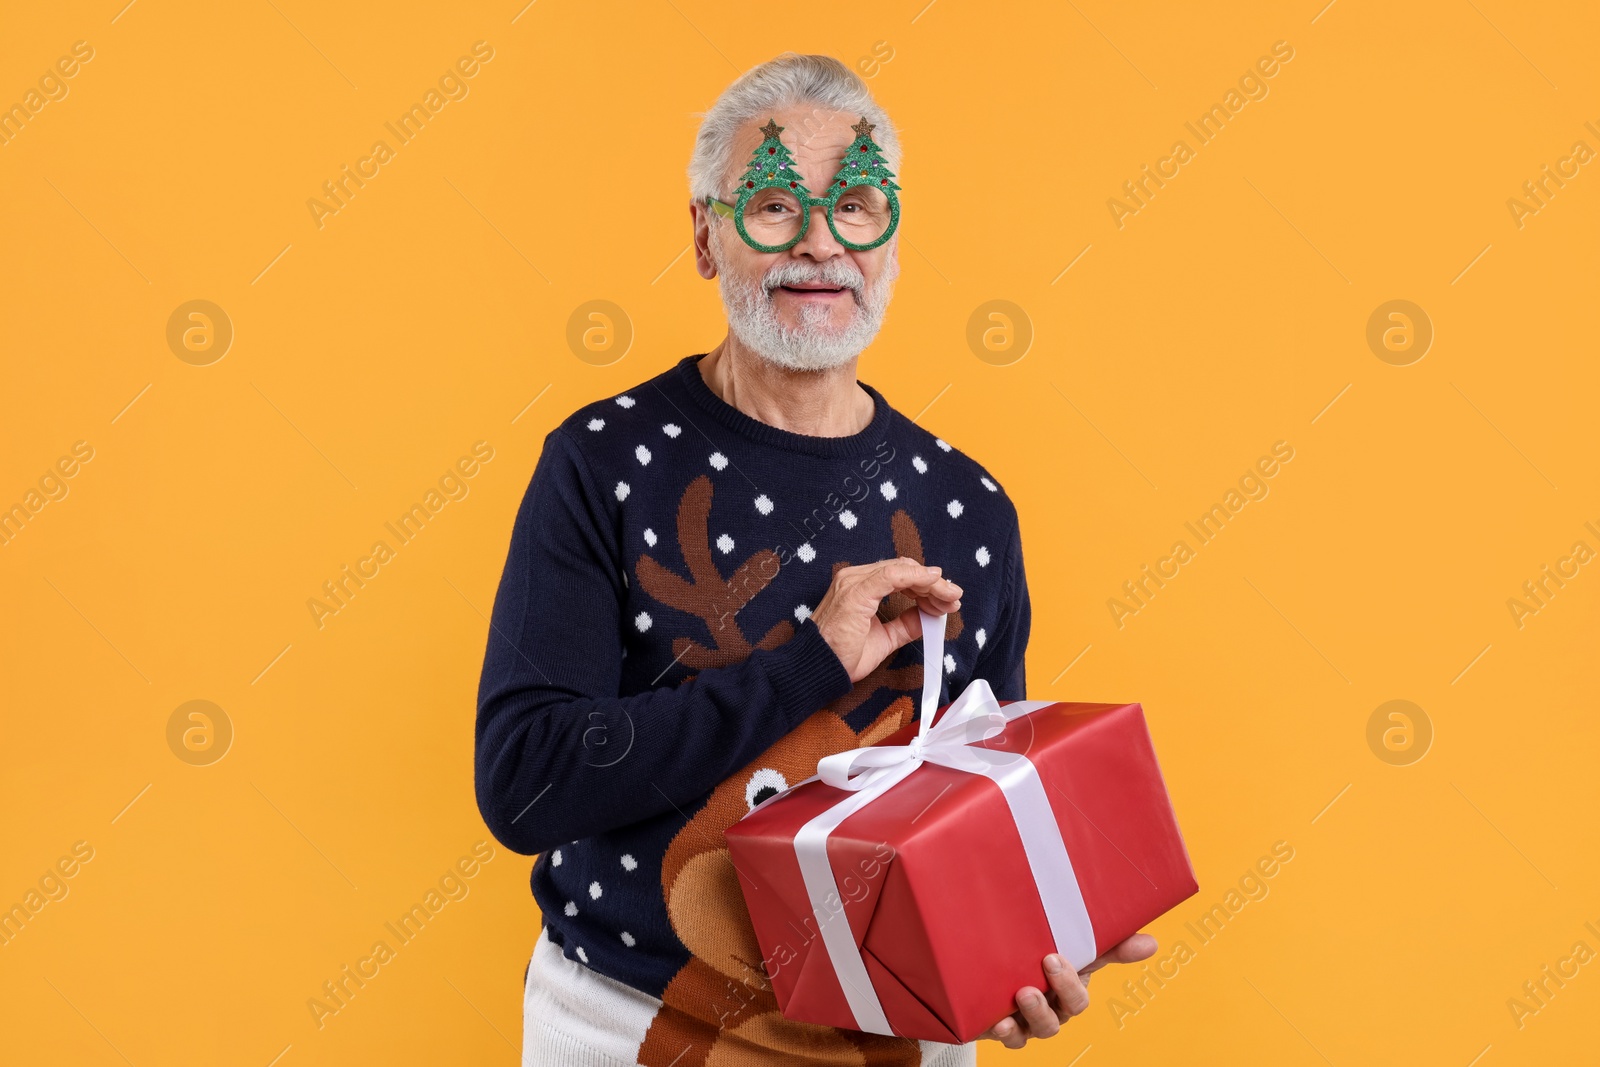 Photo of Senior man in Christmas sweater and funny glasses opening gift against orange background